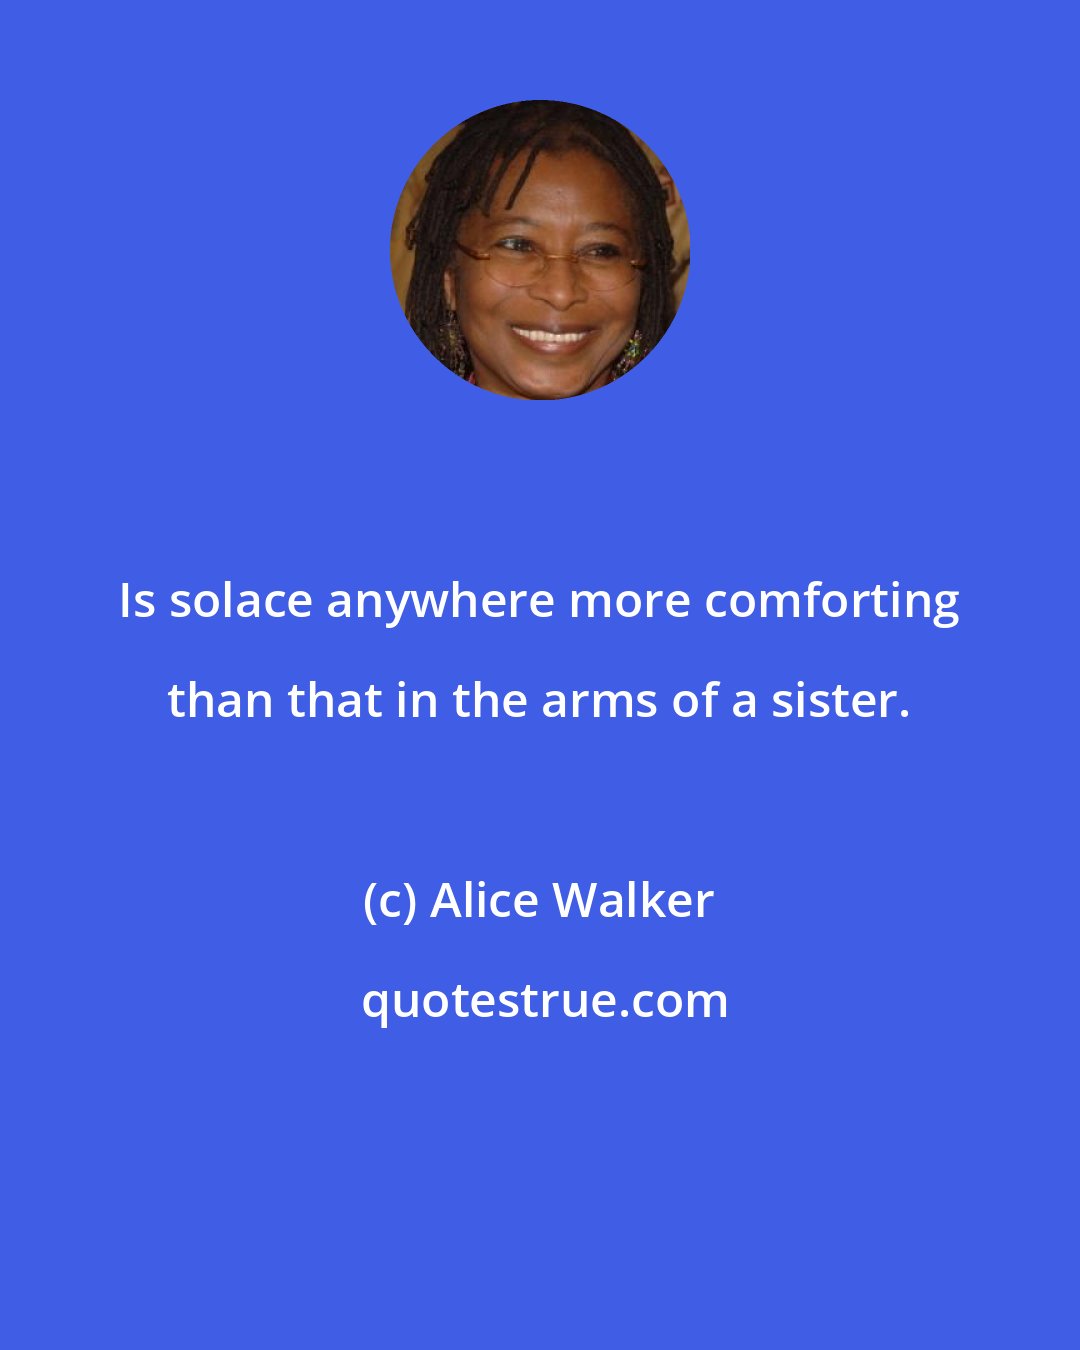 Alice Walker: Is solace anywhere more comforting than that in the arms of a sister.